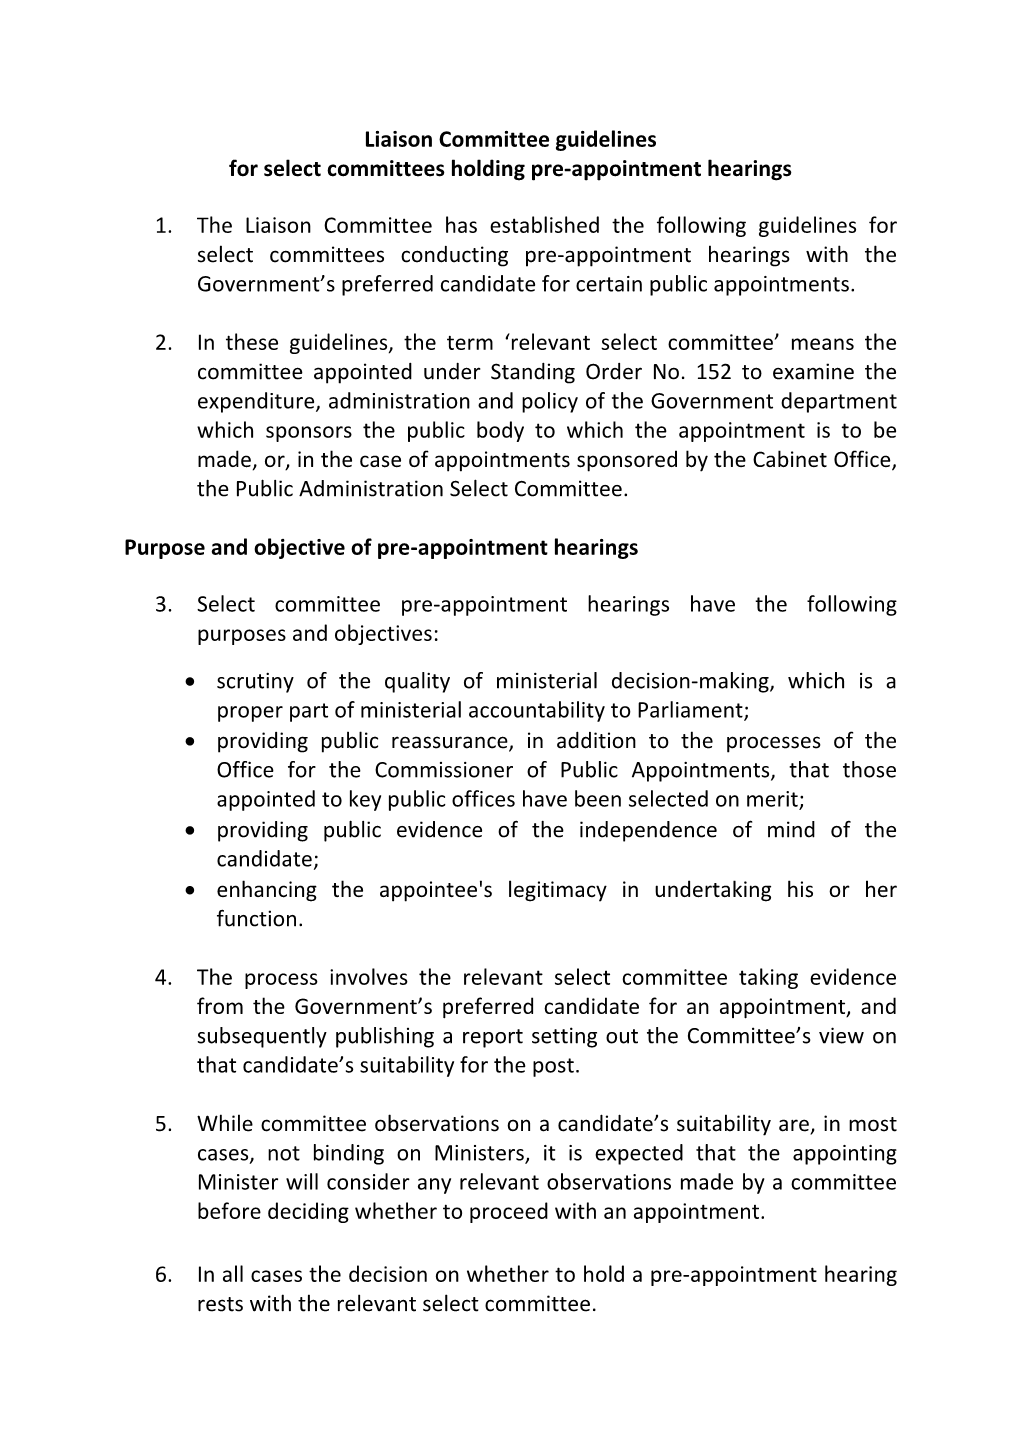 Liaison Committee Guidelines for Select Committees Holding Pre-Appointment Hearings 1. the Liaison Committee Has Established Th